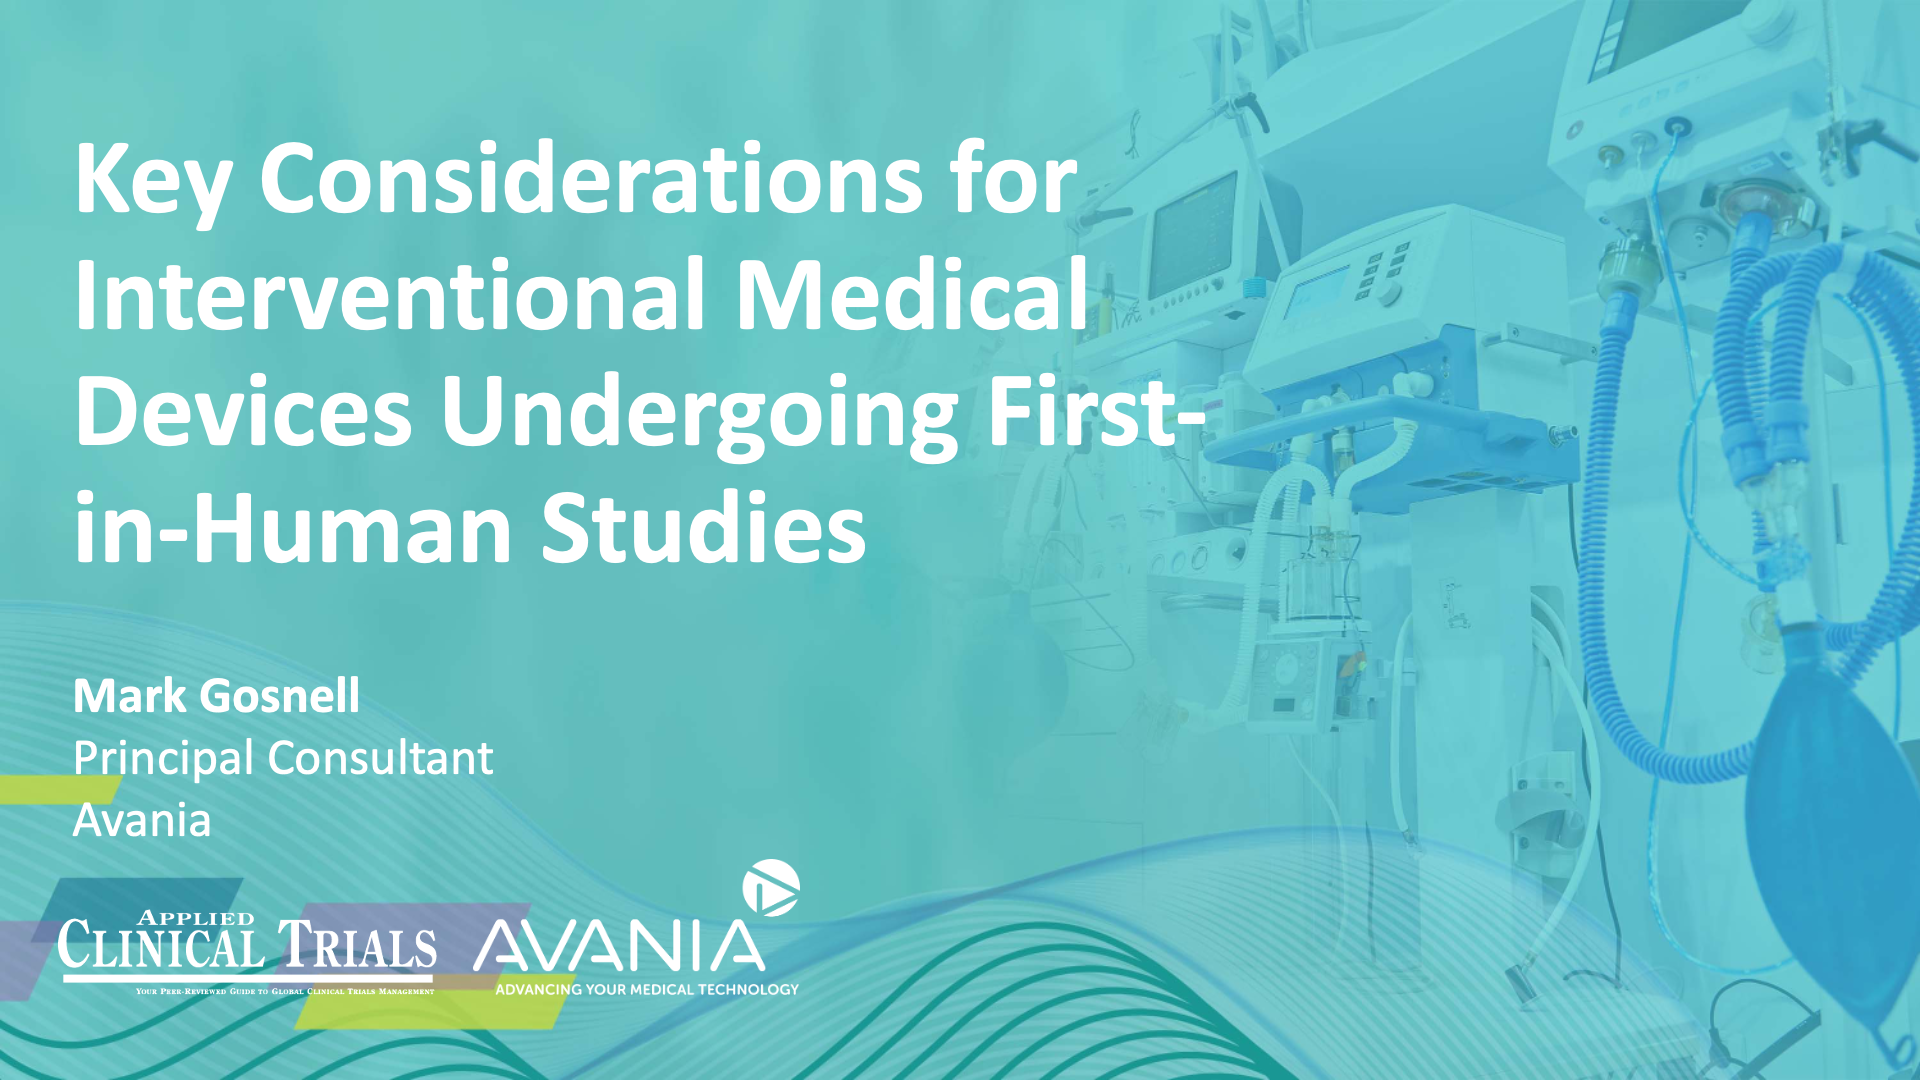 Key Considerations for Interventional Medical Devices Undergoing First-in-Human Studies